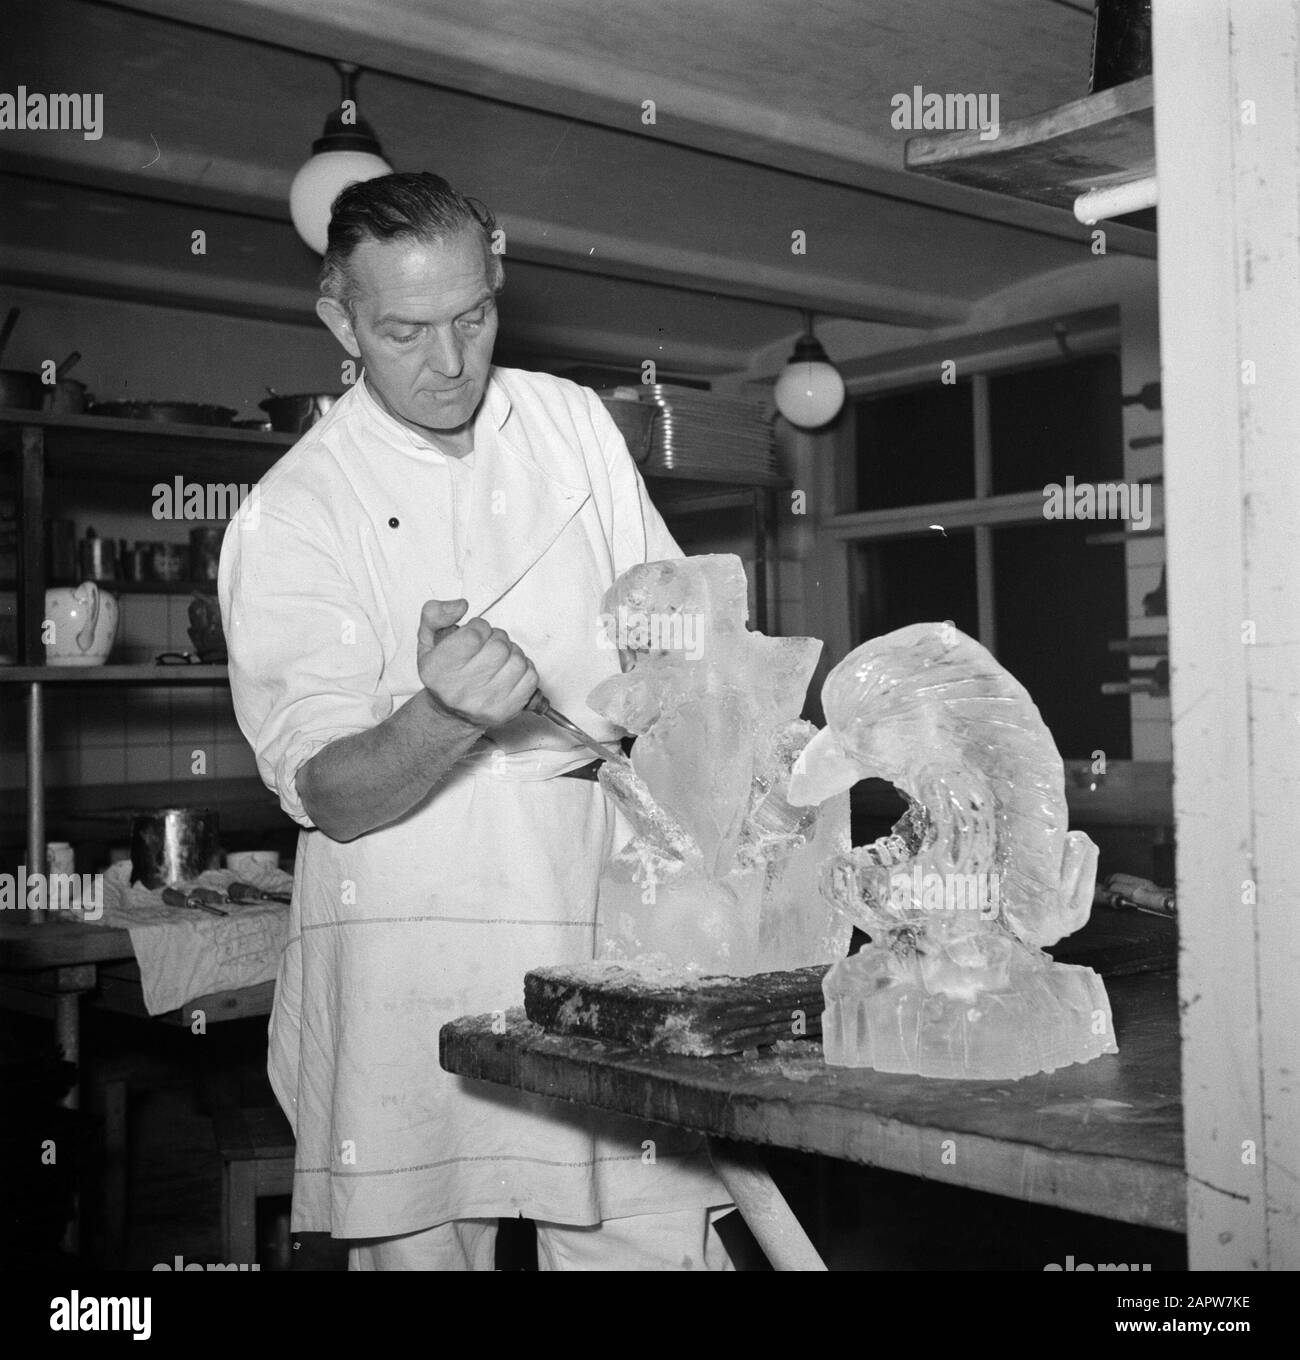 Restaurant Wivex located in the facade building of Tivoli park  Kok makes ice sculptures in the kitchen of restaurant Wivex Date: March 1954 Location: Denmark, Copenhagen Keywords: sculpture, sculptures, headgear, catering staff, ice cream, kitchens, clothing, cooks, restaurants, crockery Institution name: Wivex Stock Photo